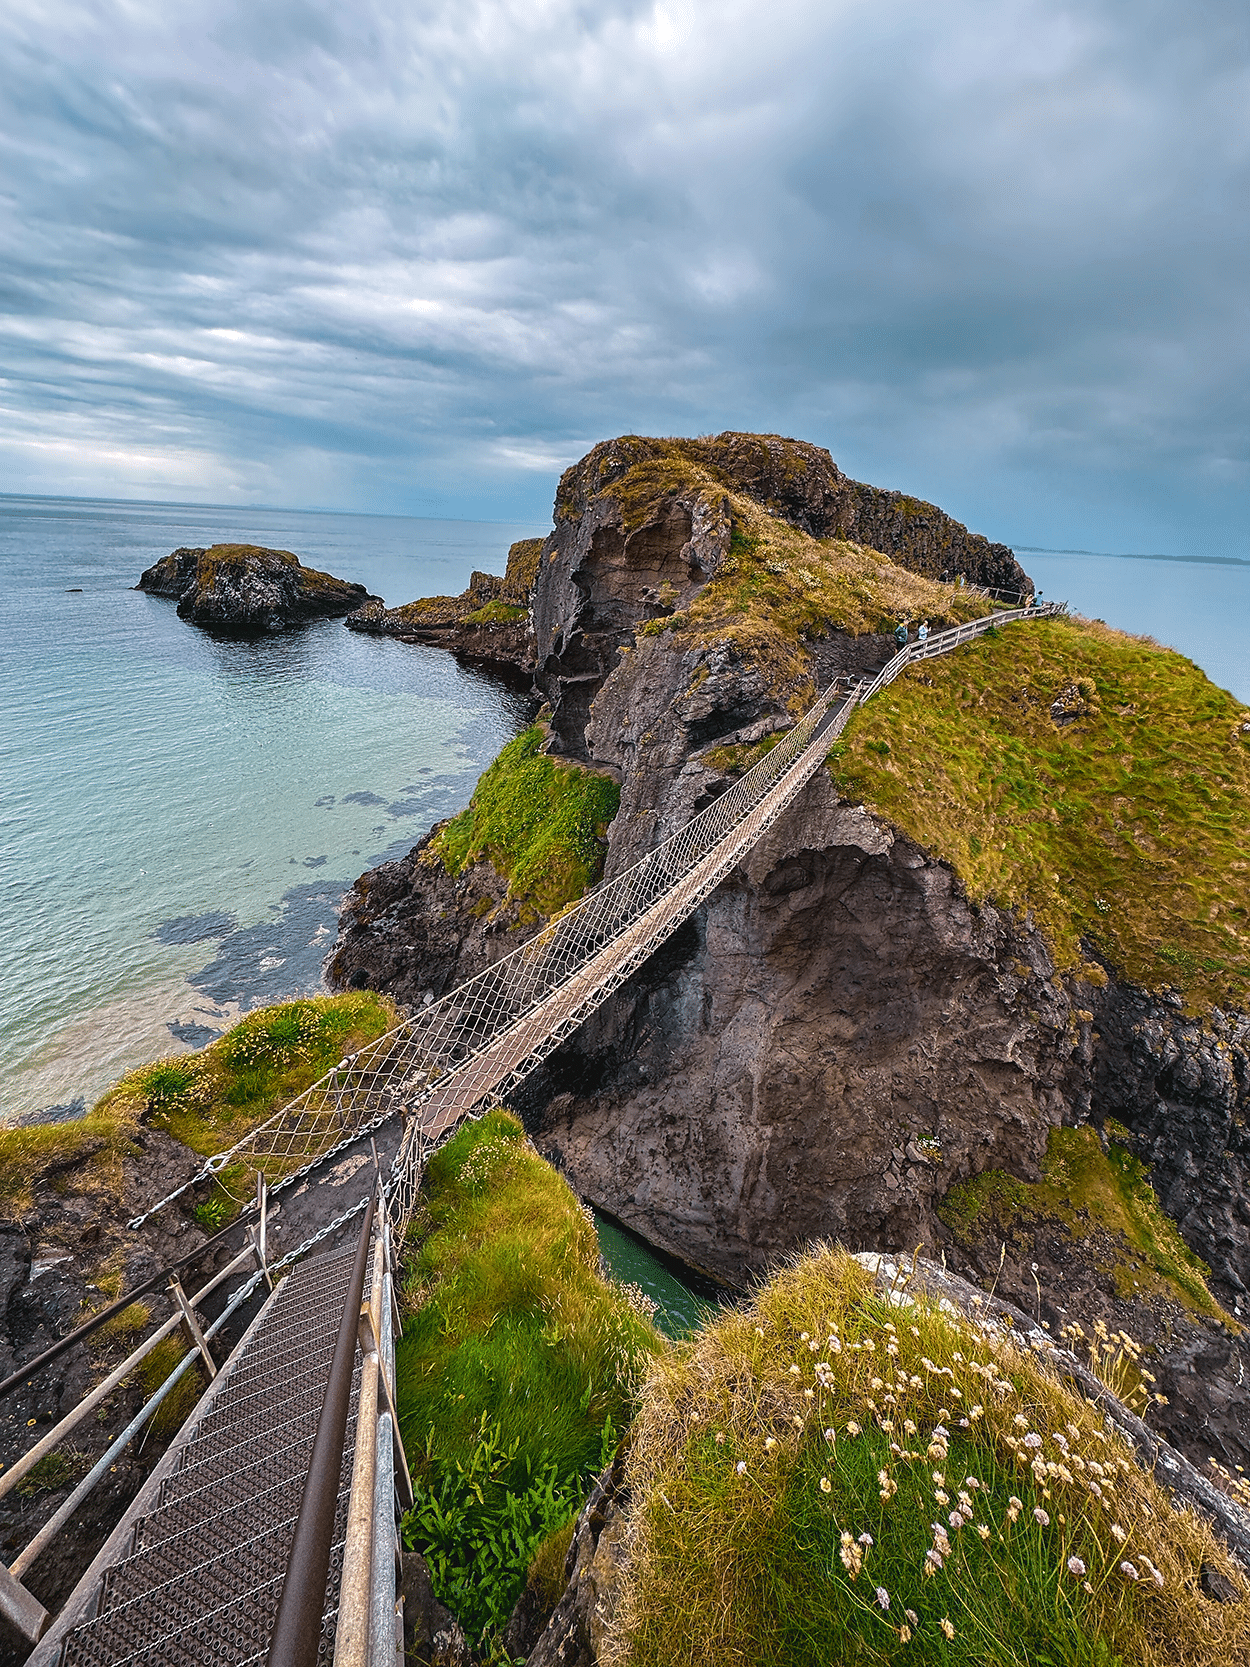 Carrick-A-Rede rope bridge in Bushmills Northern Ireland- photo by Keryn Means editor of Twist Travel Magazine